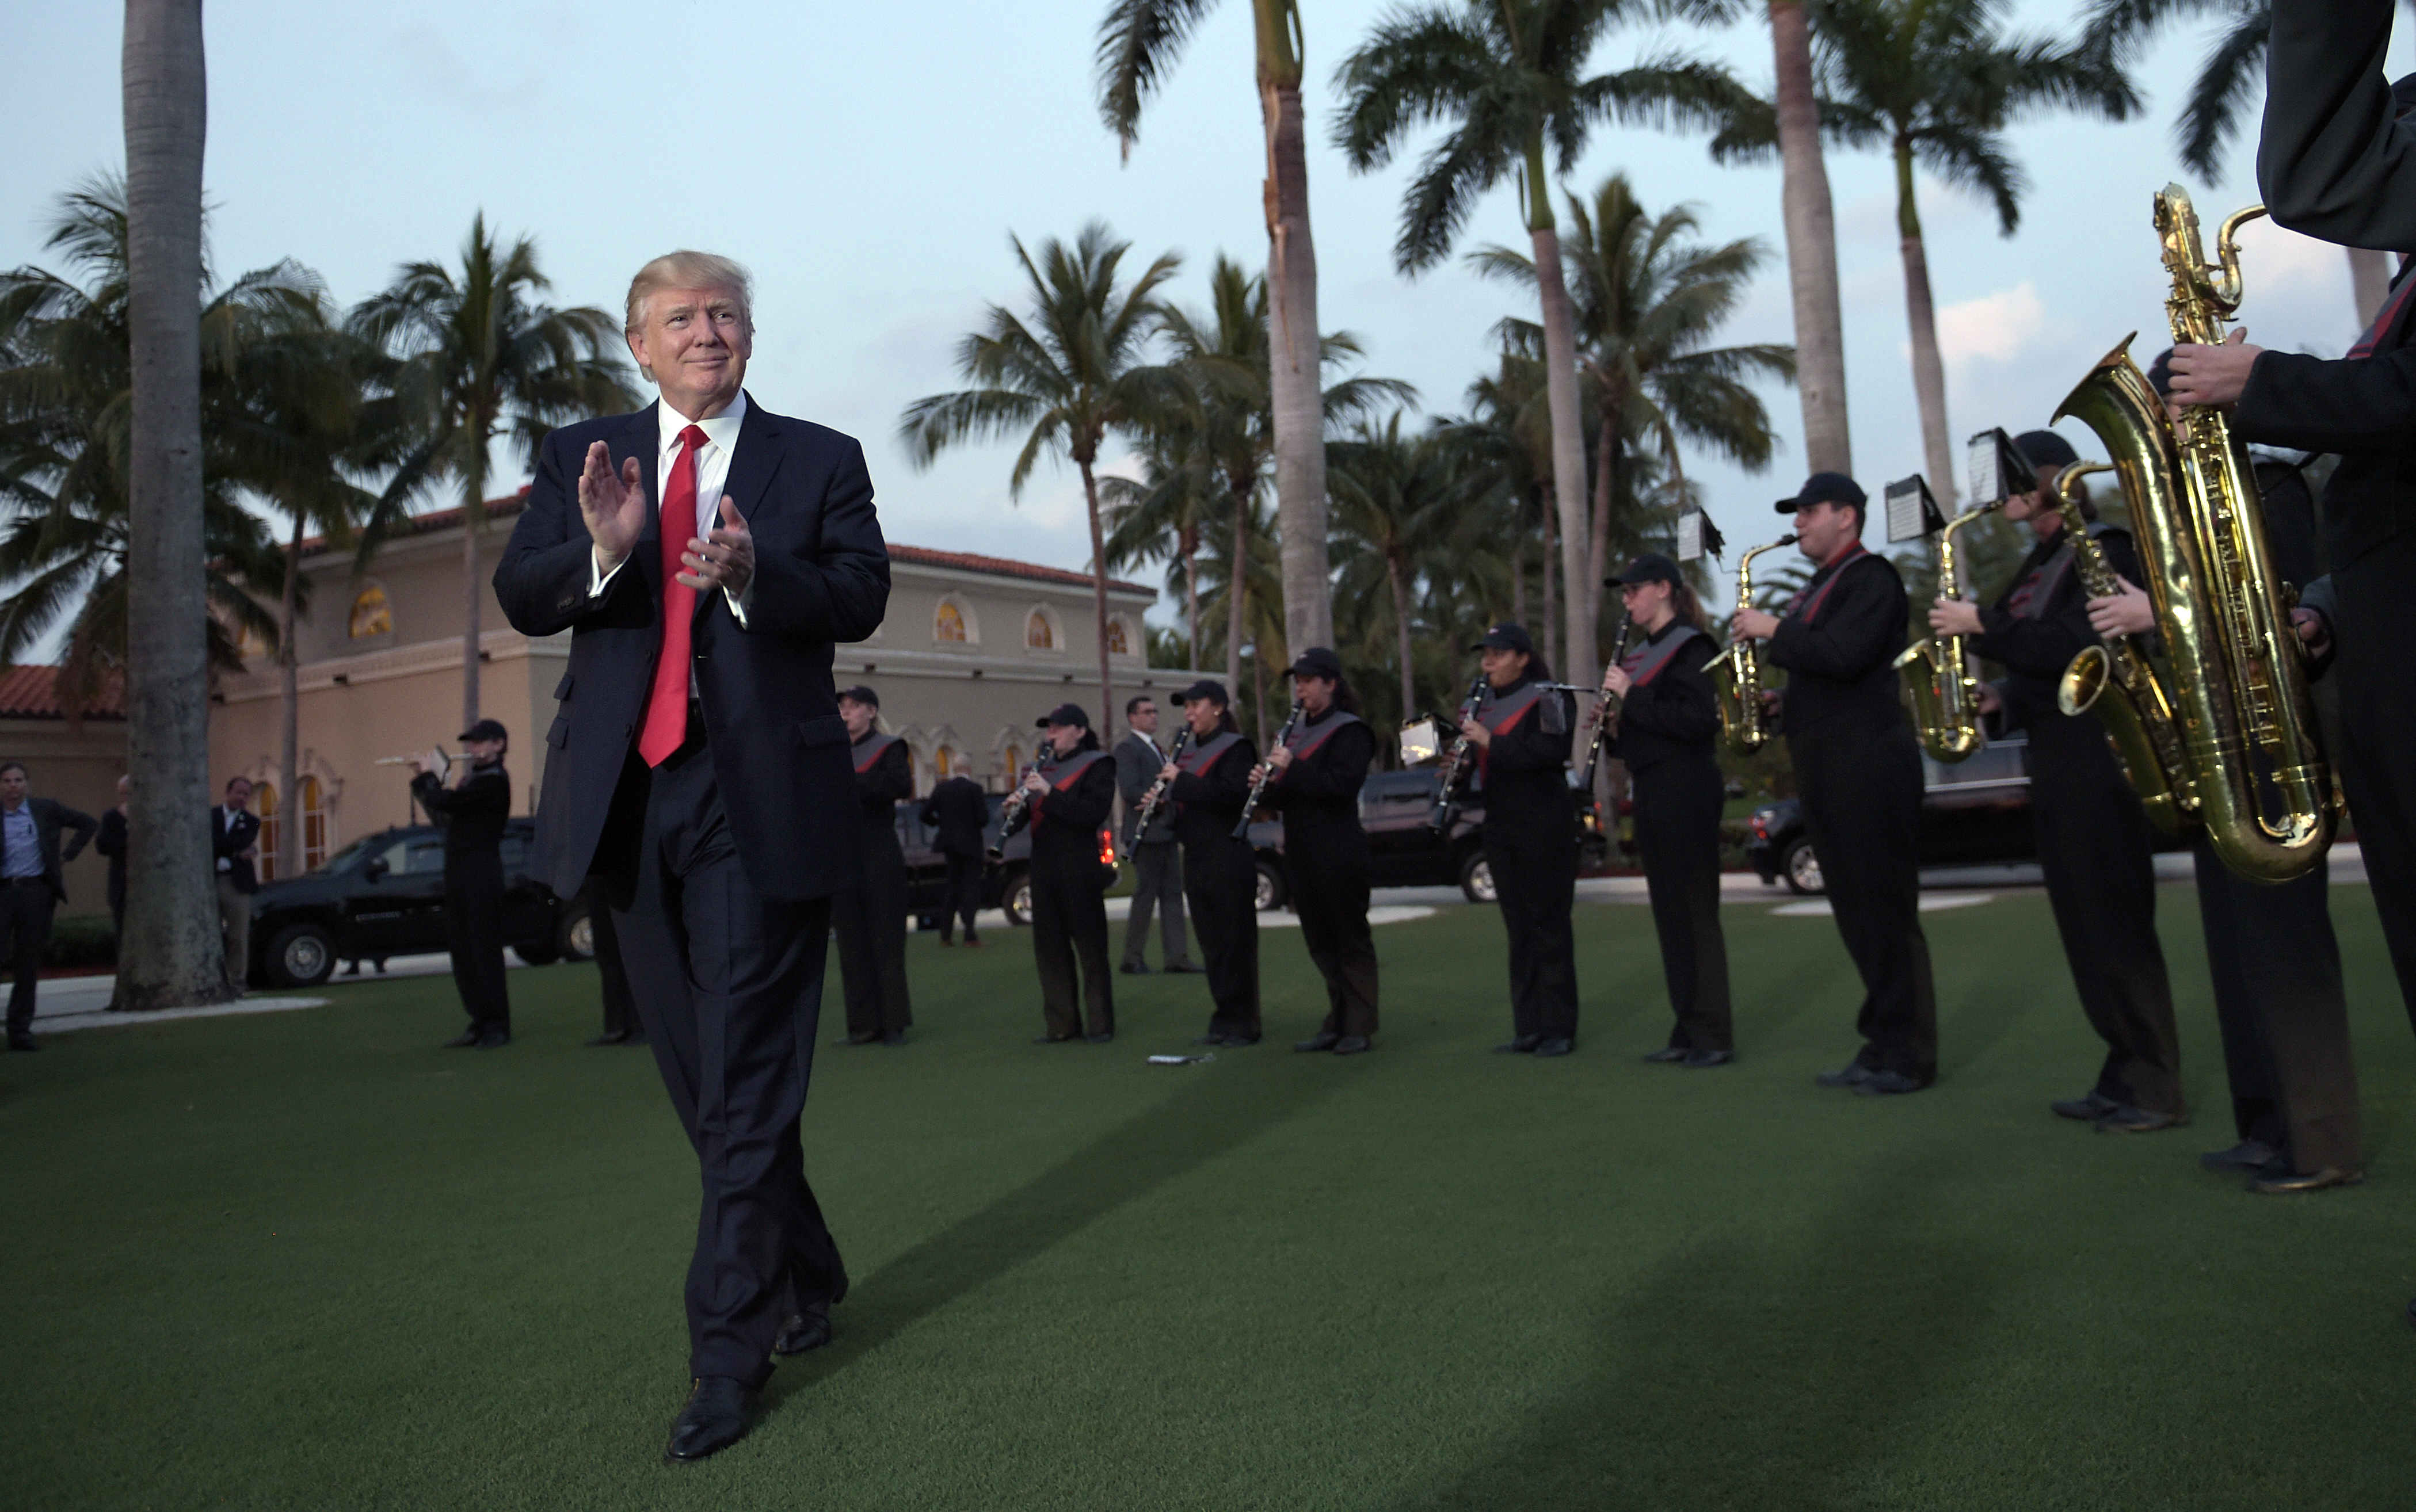 foto : susan walsh : day 17 - in this feb. 5, 2017, file photo, president donald trump listens to the palm beach central high school band as they play at his arrival at trump international golf club in west palm beach, fla. (ap photo/susan walsh, file)